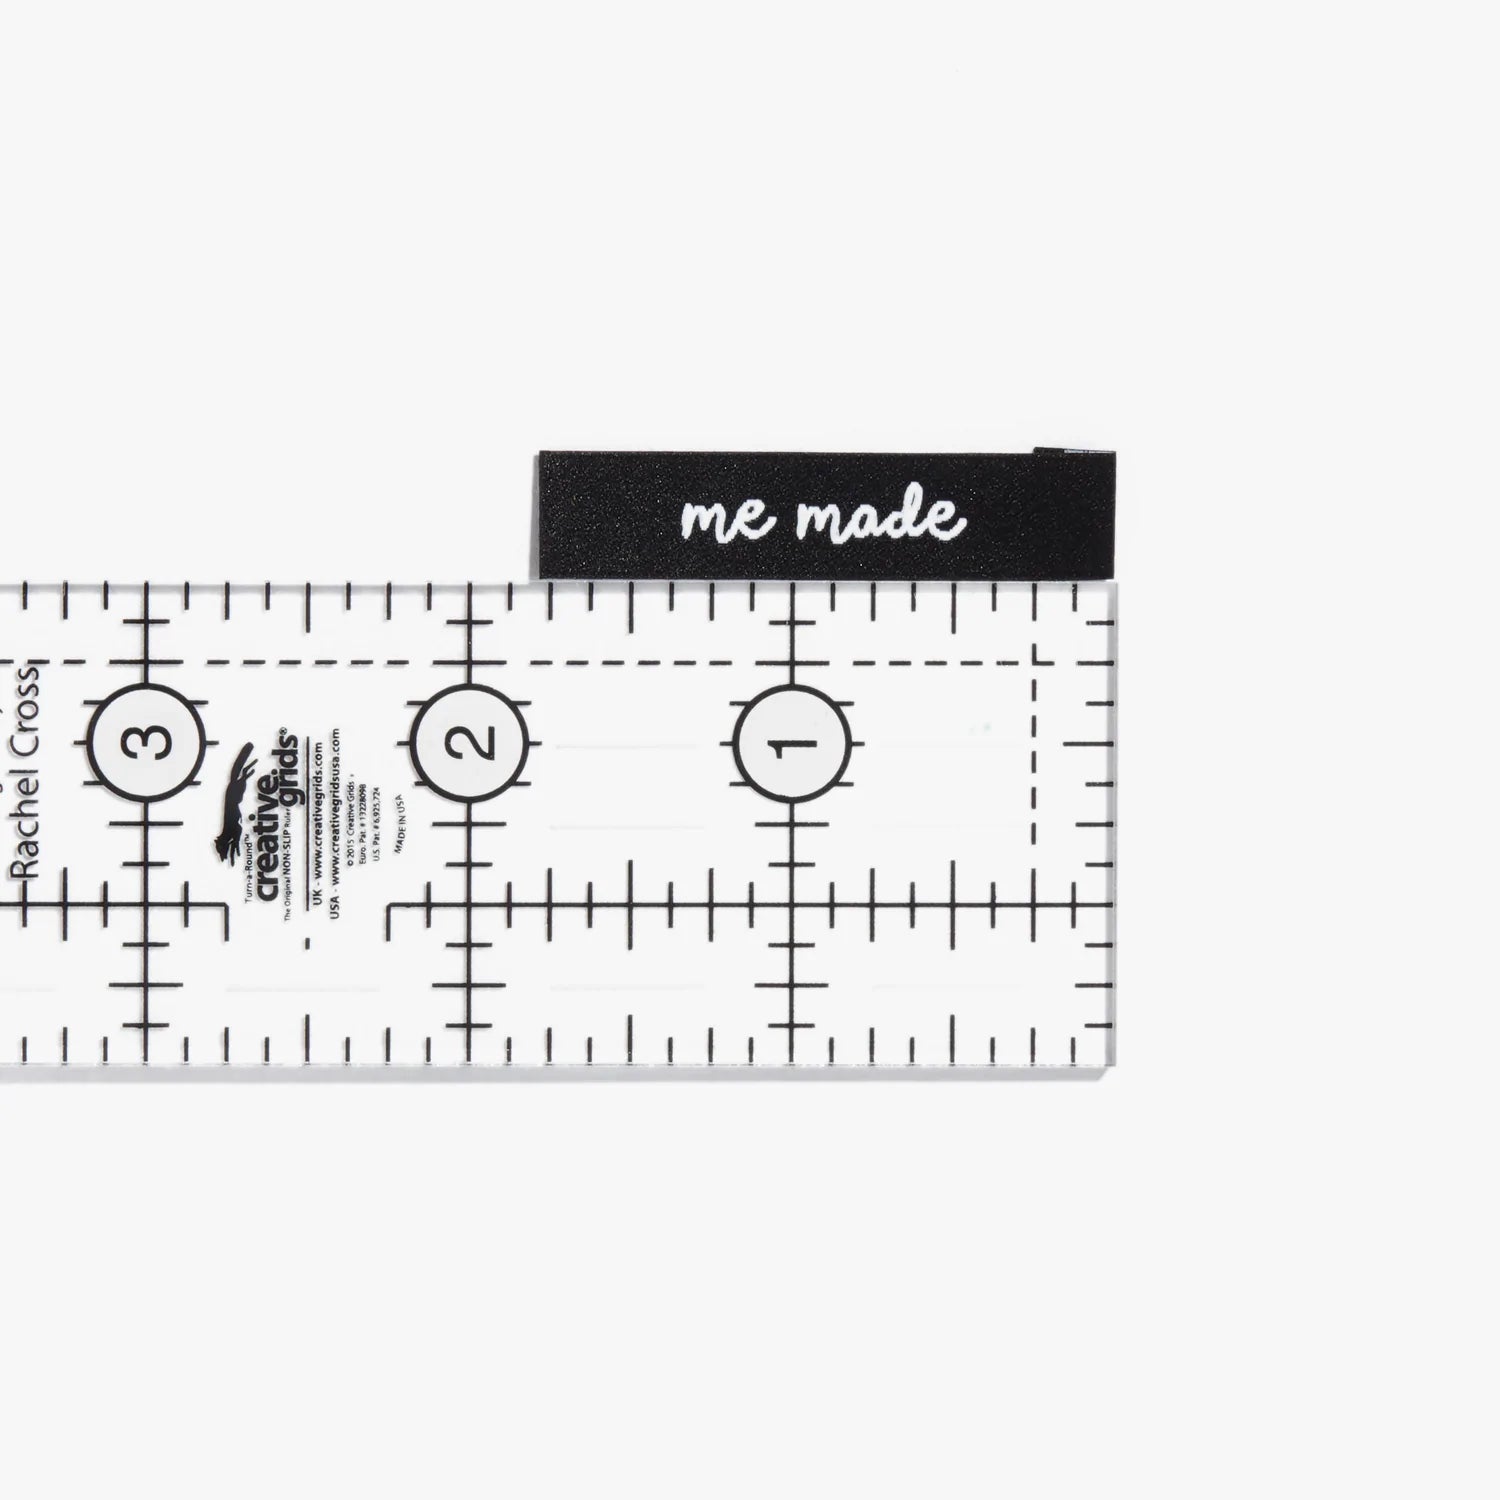 "Me Made" Woven Labels 10 Pack Kylie and the Machine